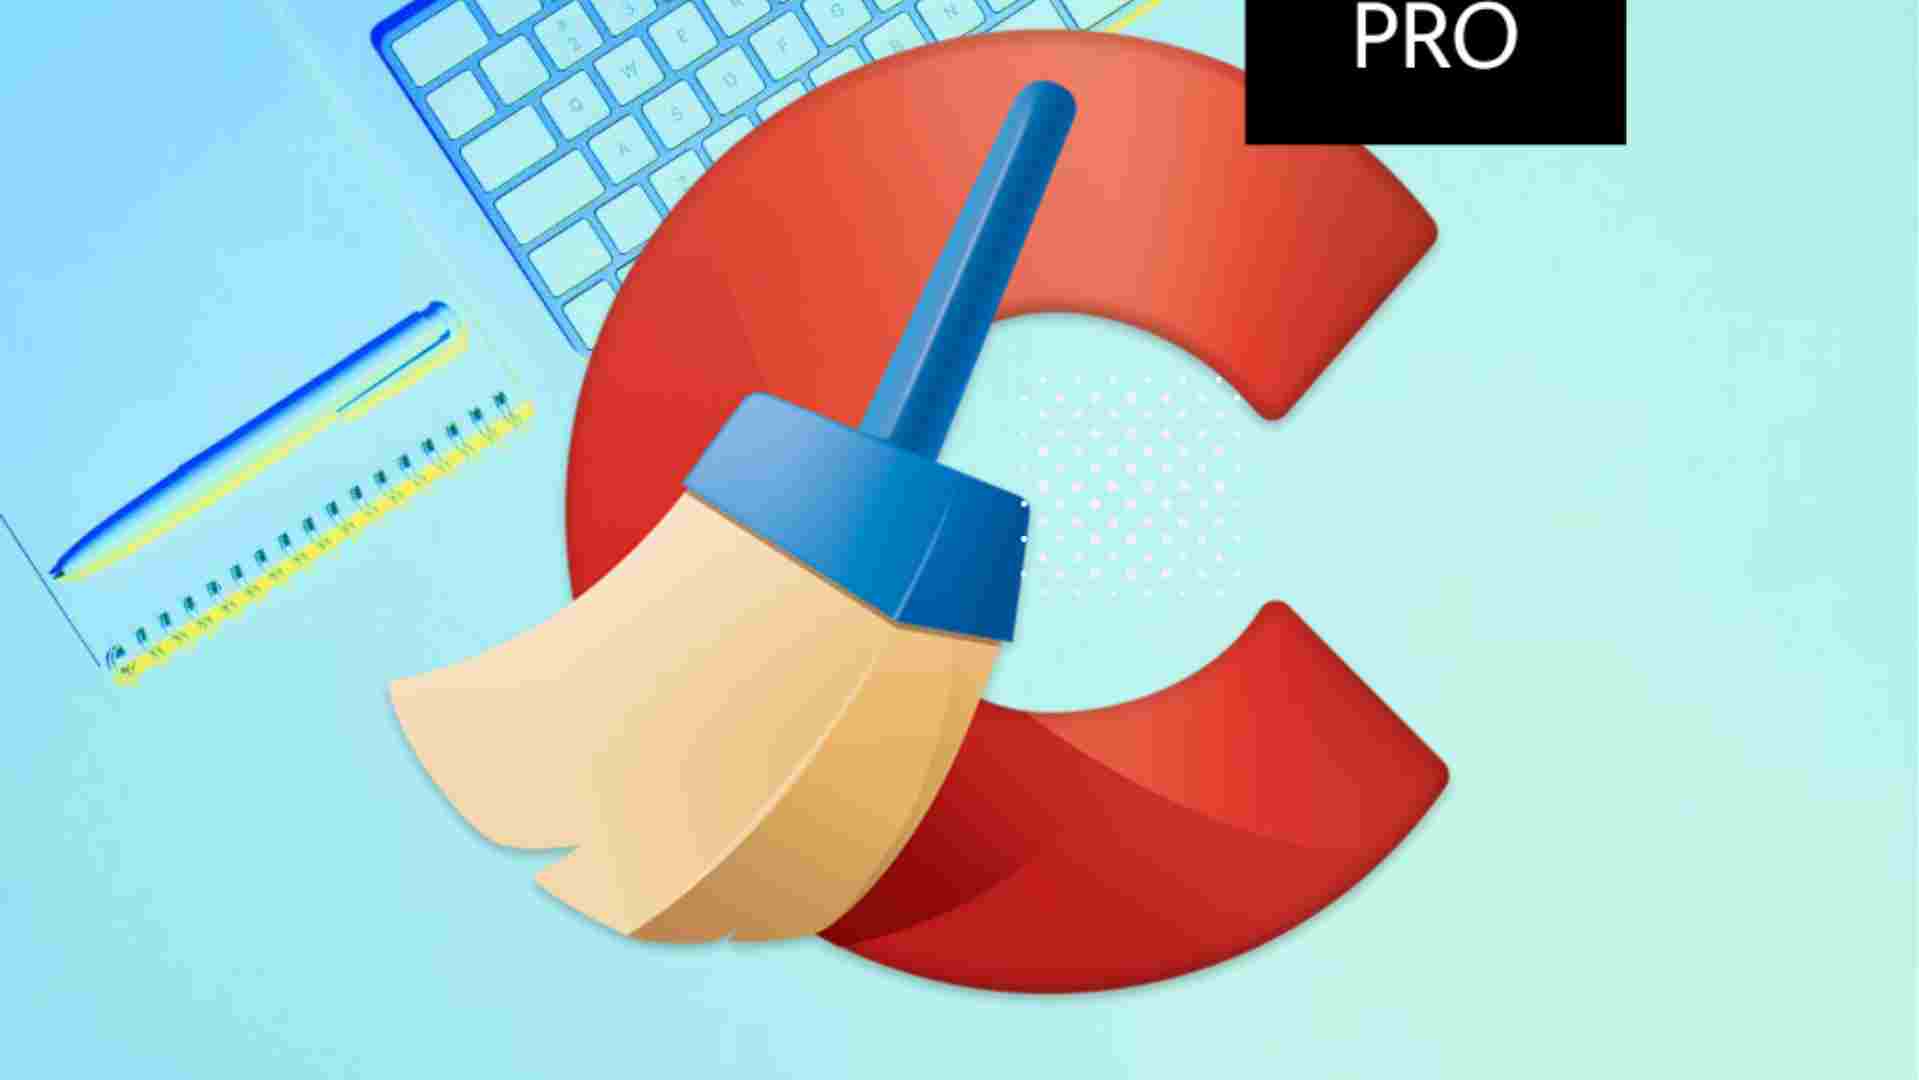 ccleaner software free download for mobile